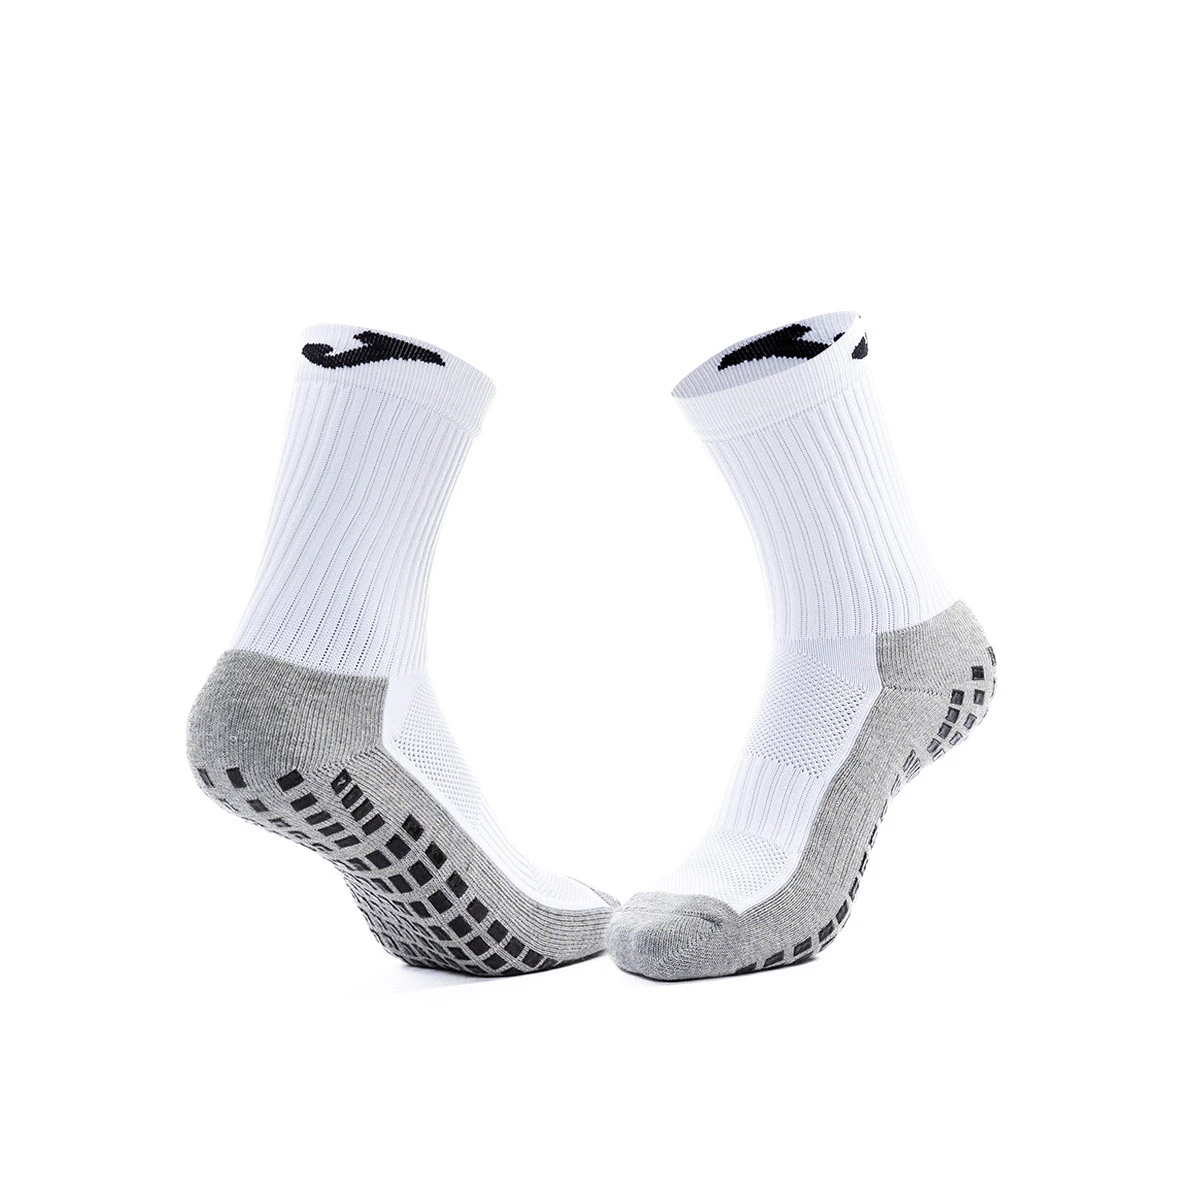 PACK X3 CALCETINES JOMA MADRID NEGRO LIMA BLANCO 401056AA001A